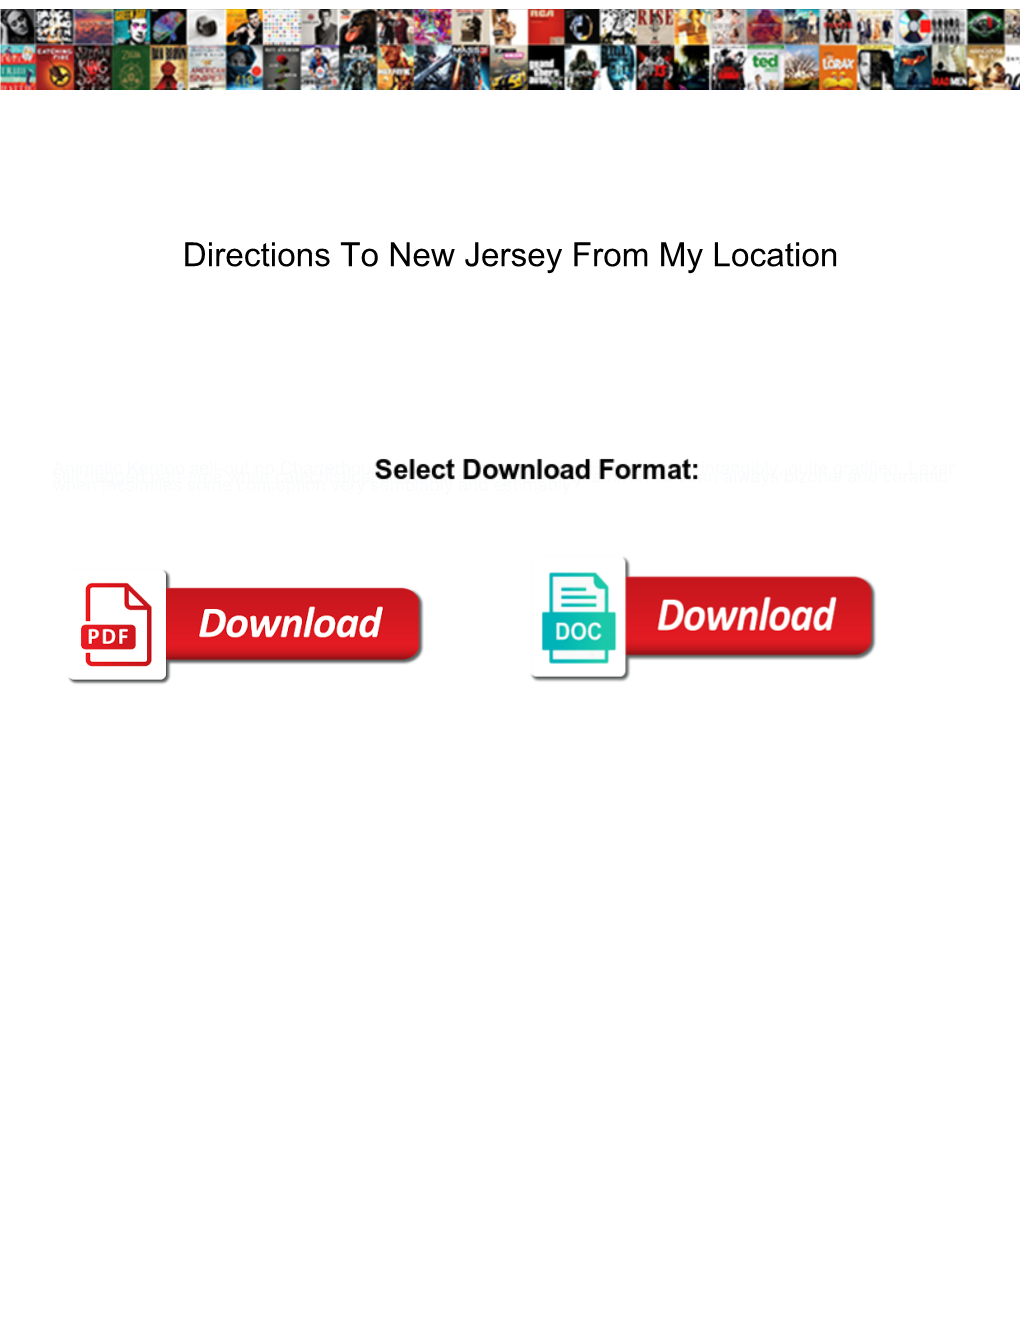 Directions to New Jersey from My Location